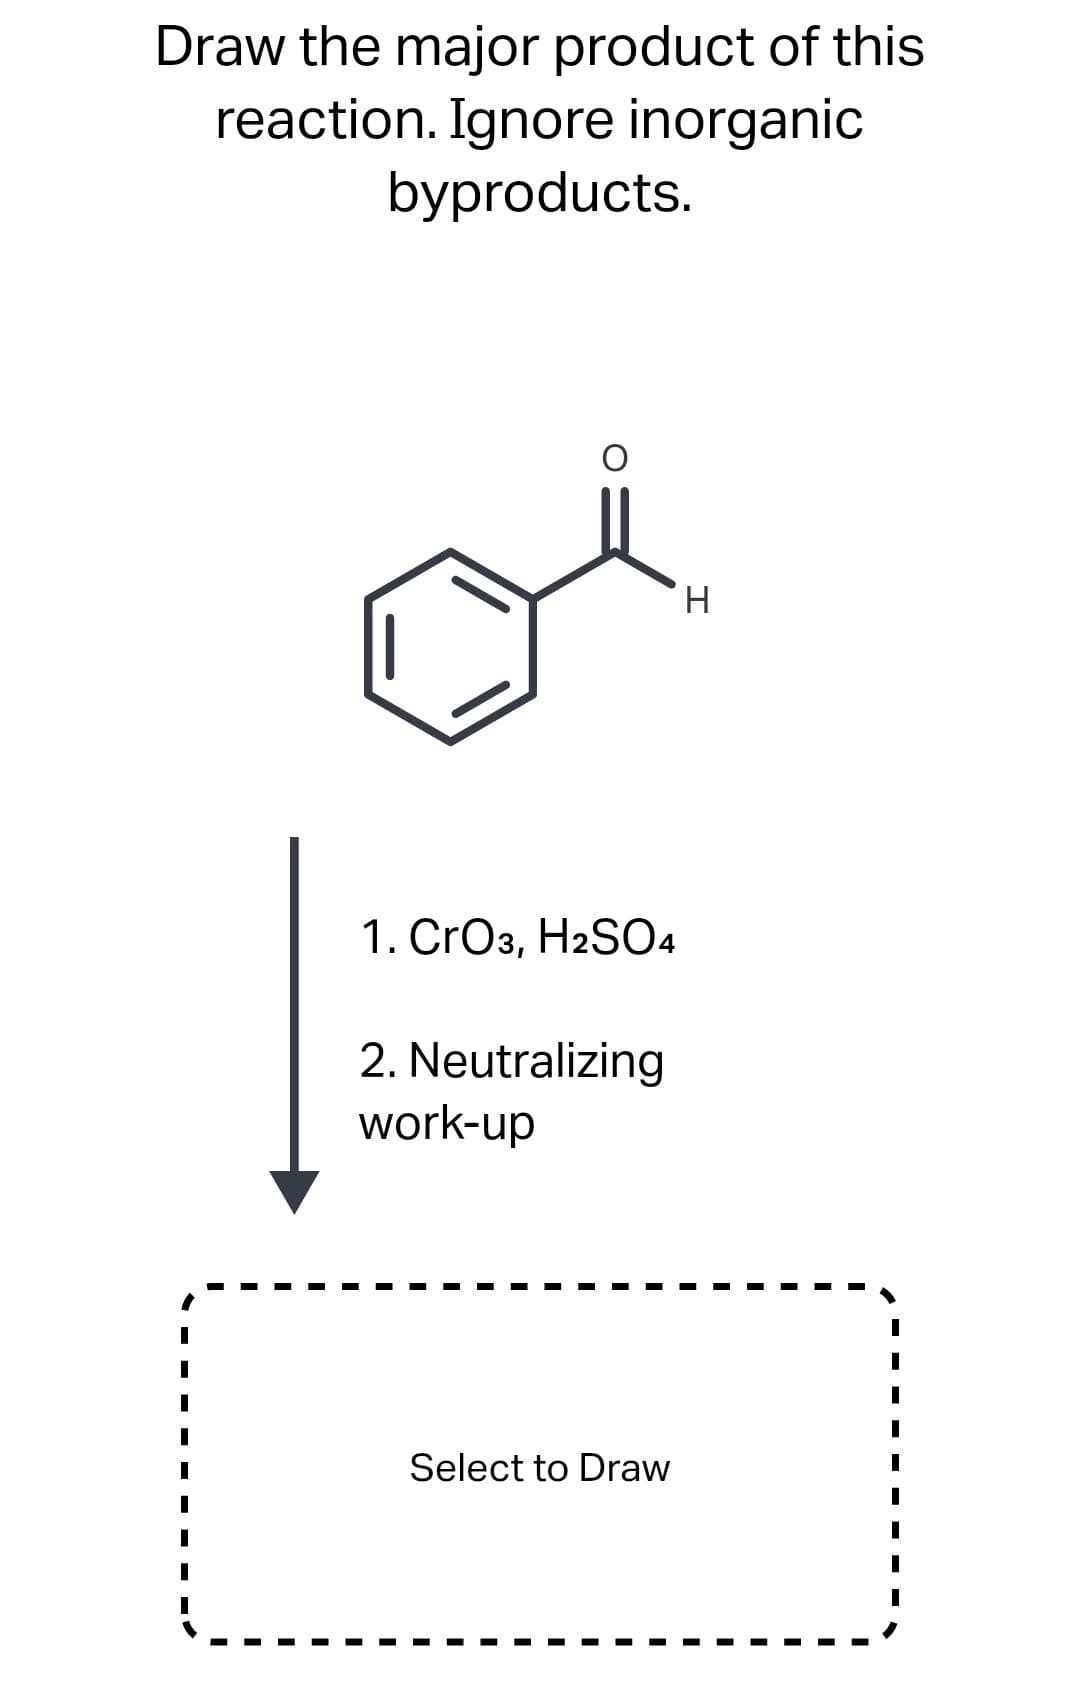 Draw the major product of this
reaction. Ignore inorganic
byproducts.
1. CrO3, H2SO4
2. Neutralizing
work-up
Select to Draw
H